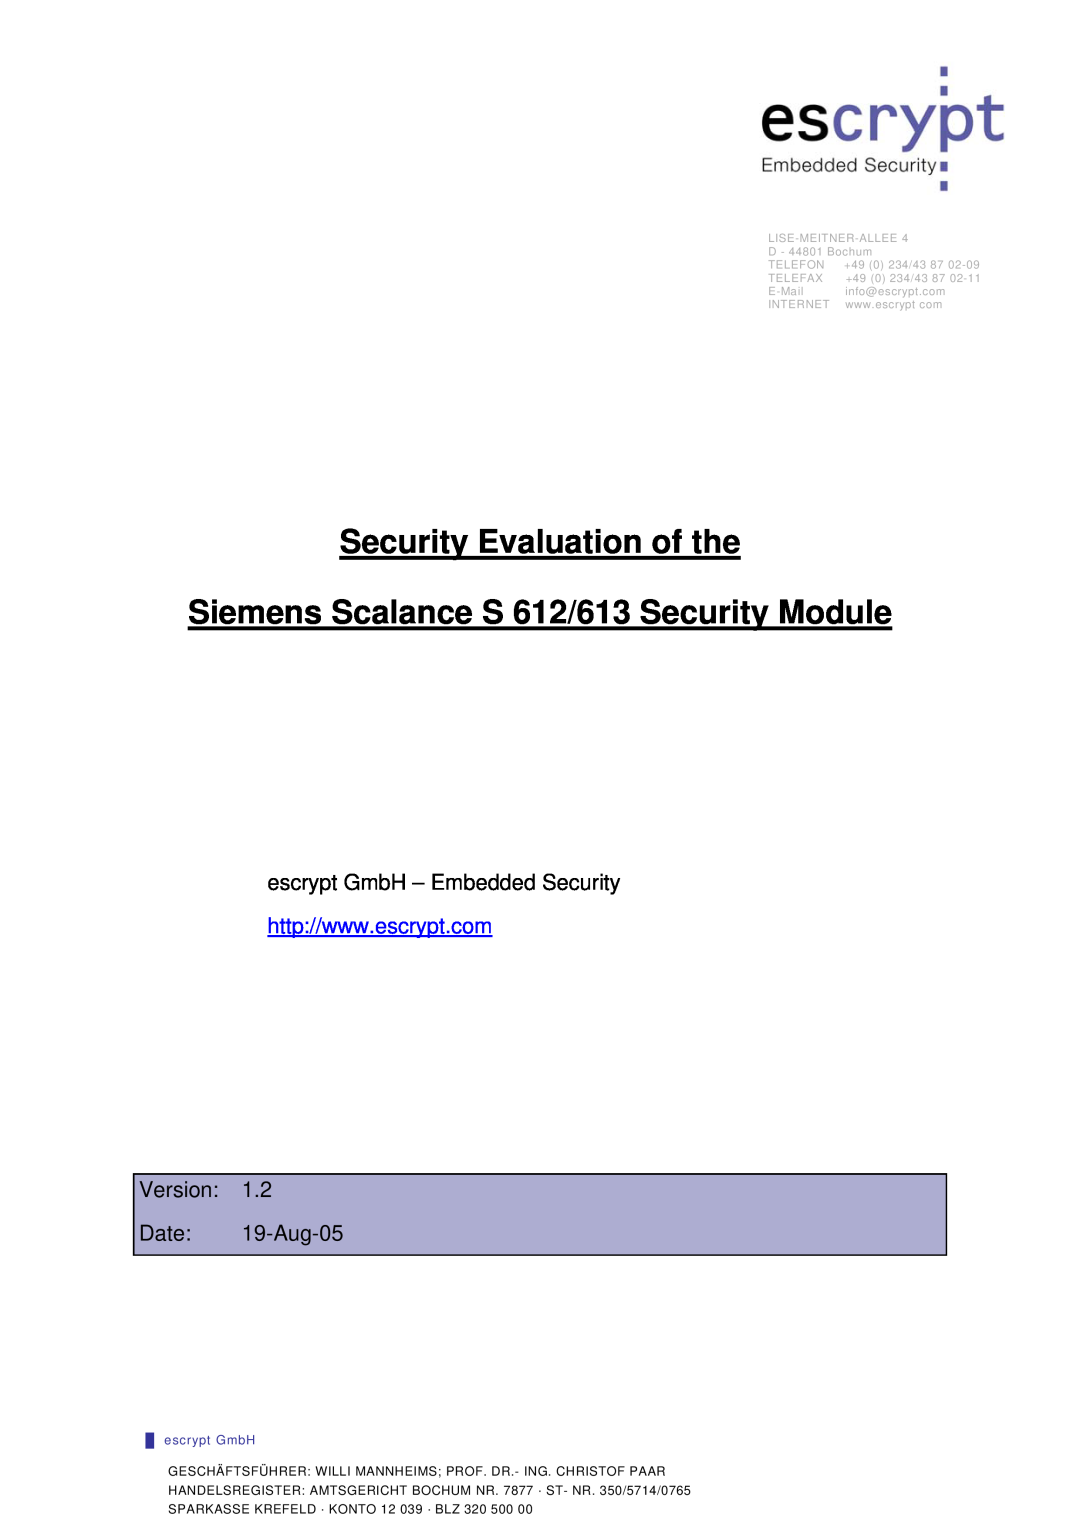 Siemens Version: 1.2 manual Security Evaluation of the, Siemens Scalance S 612/613 Security Module, Version Date 19-Aug-05 